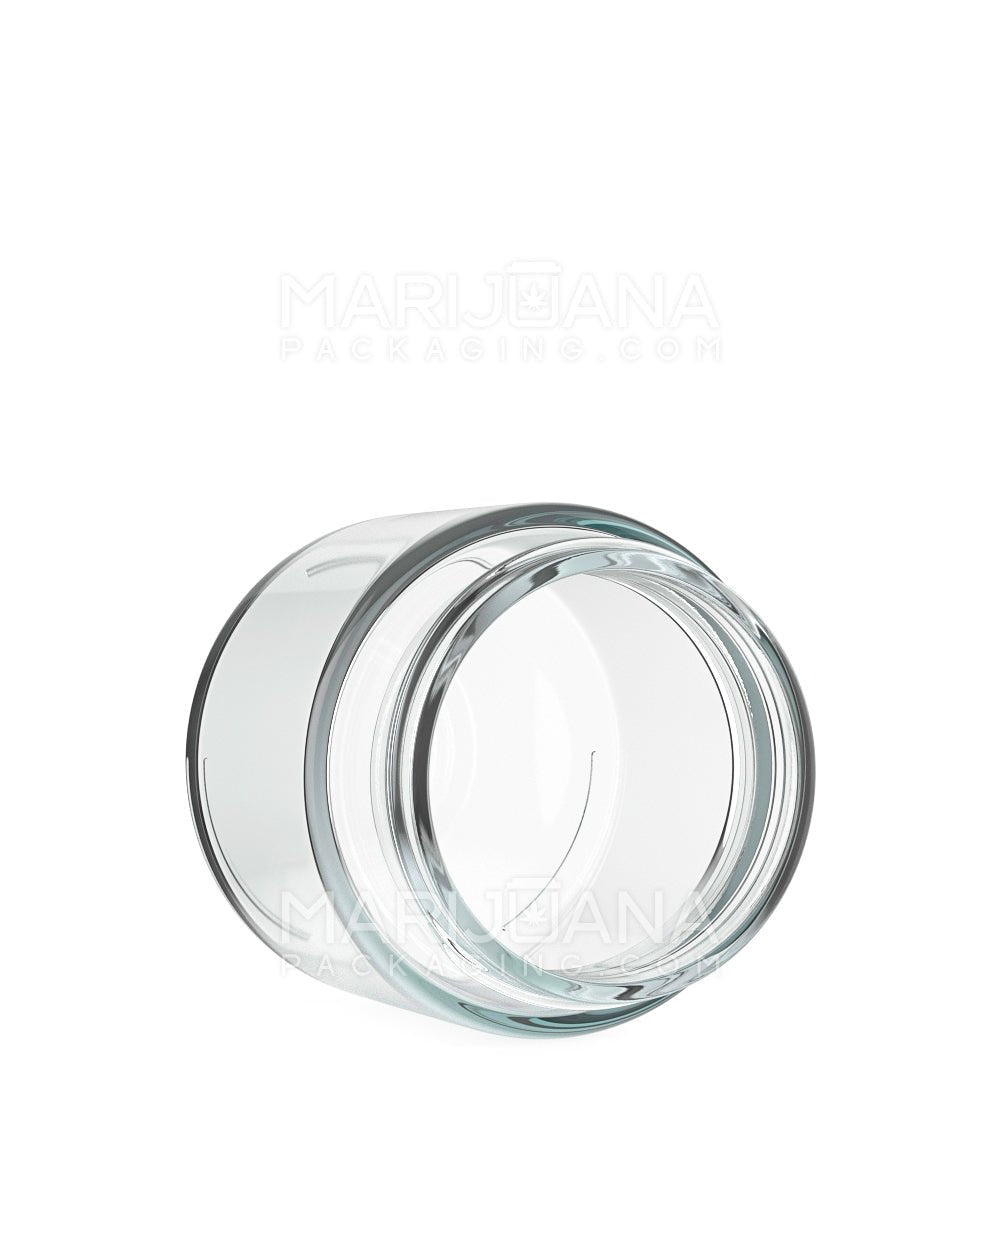 Straight Sided Clear Glass Jars | 53mm - 3oz - 144 Count - 4